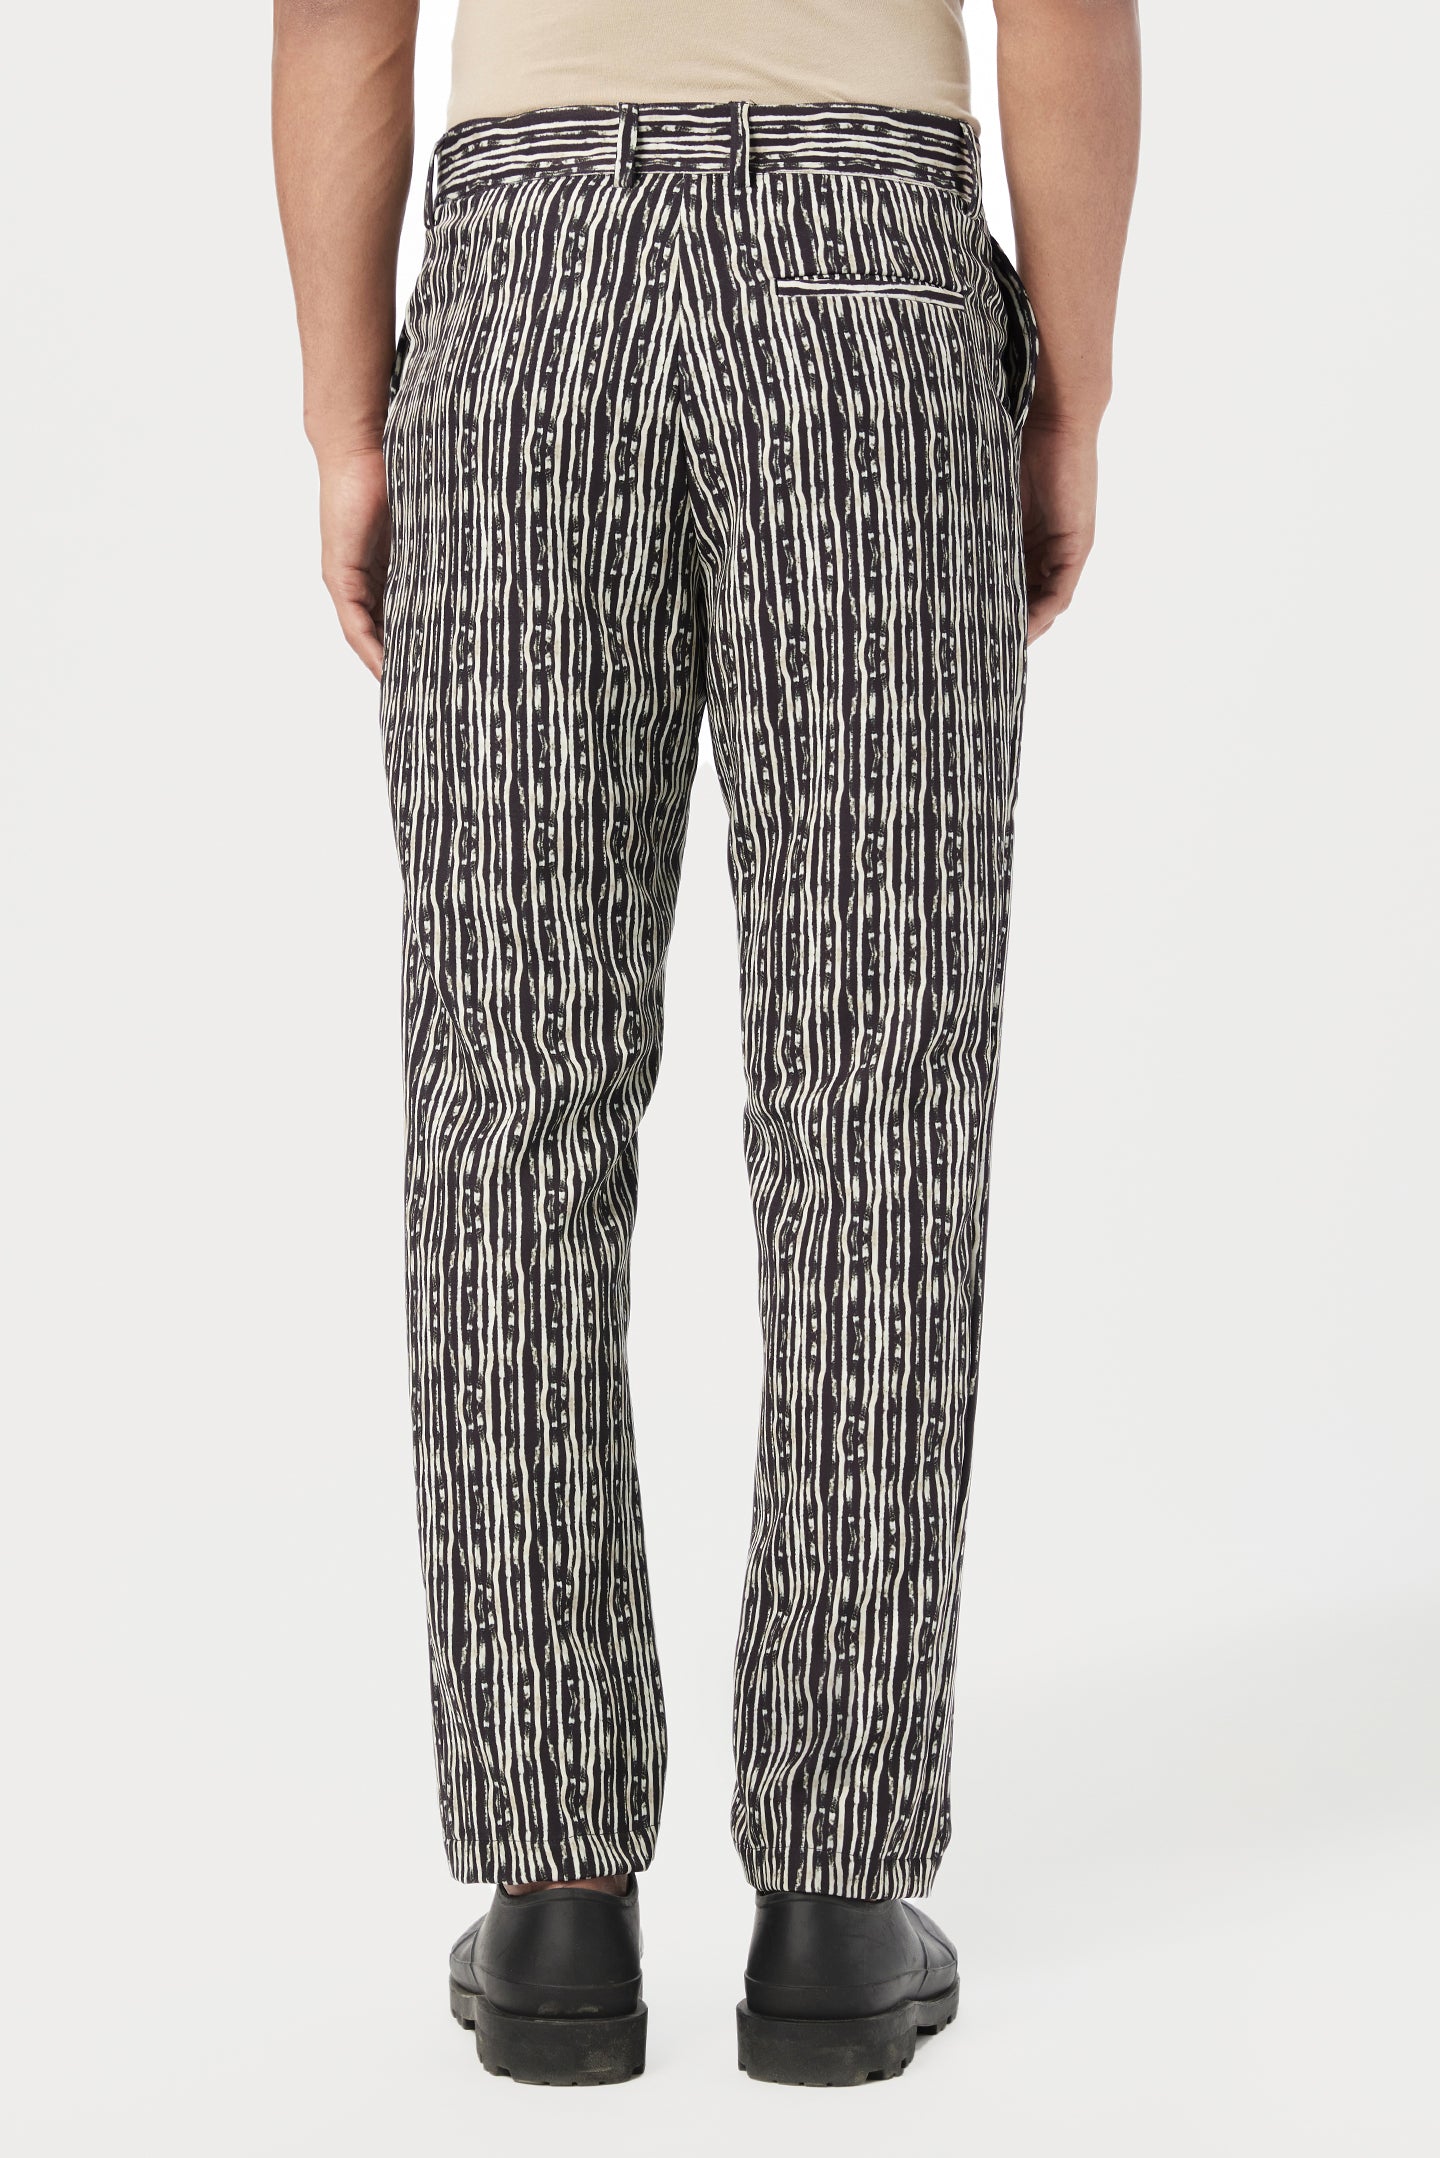 Classic Fit Trousers with All-Over Thin Textured Stripes Print